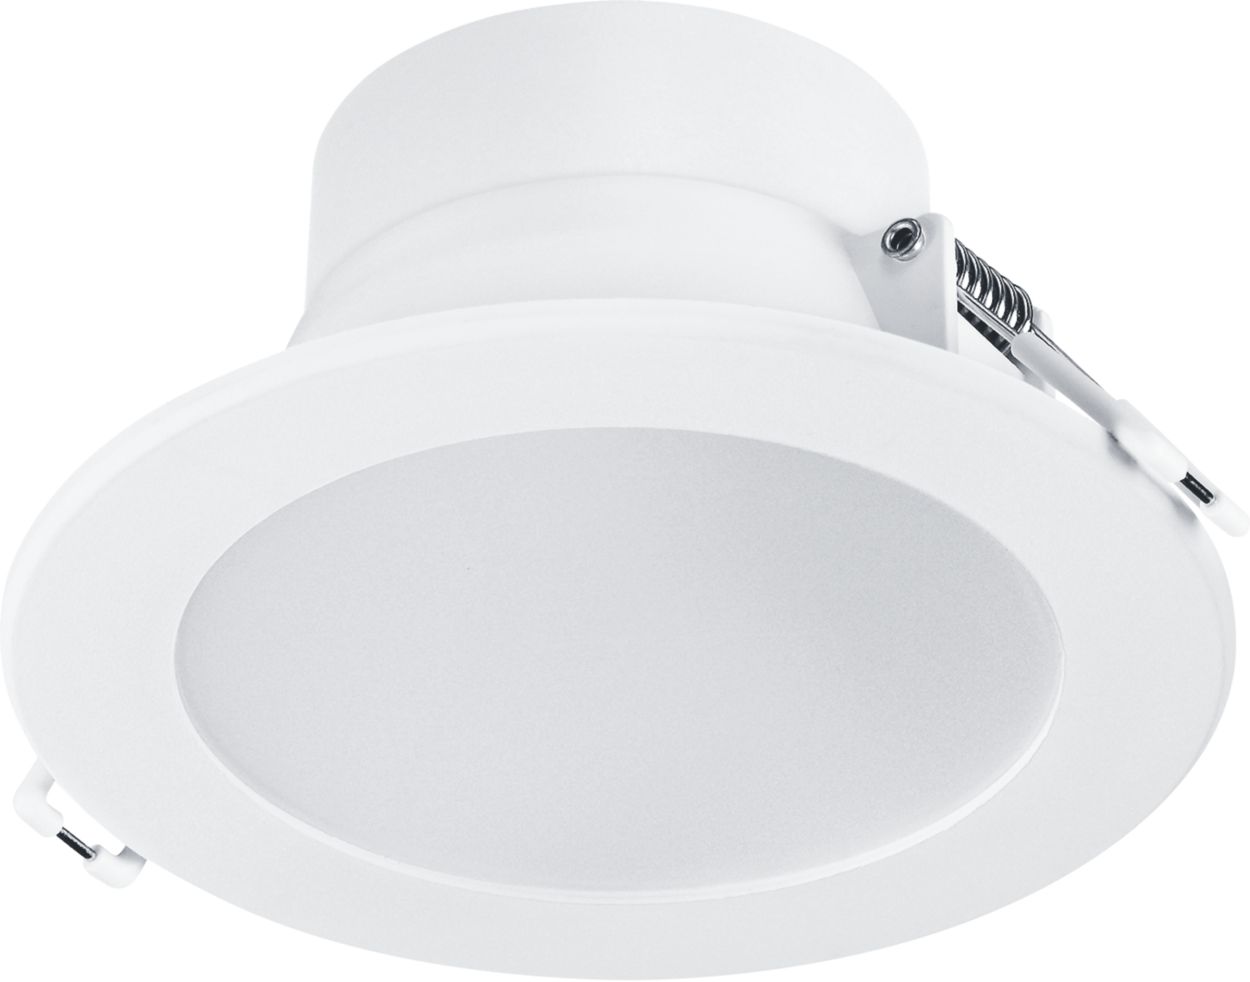 Trusted performance, everyday. Tri-colour enabled downlight.